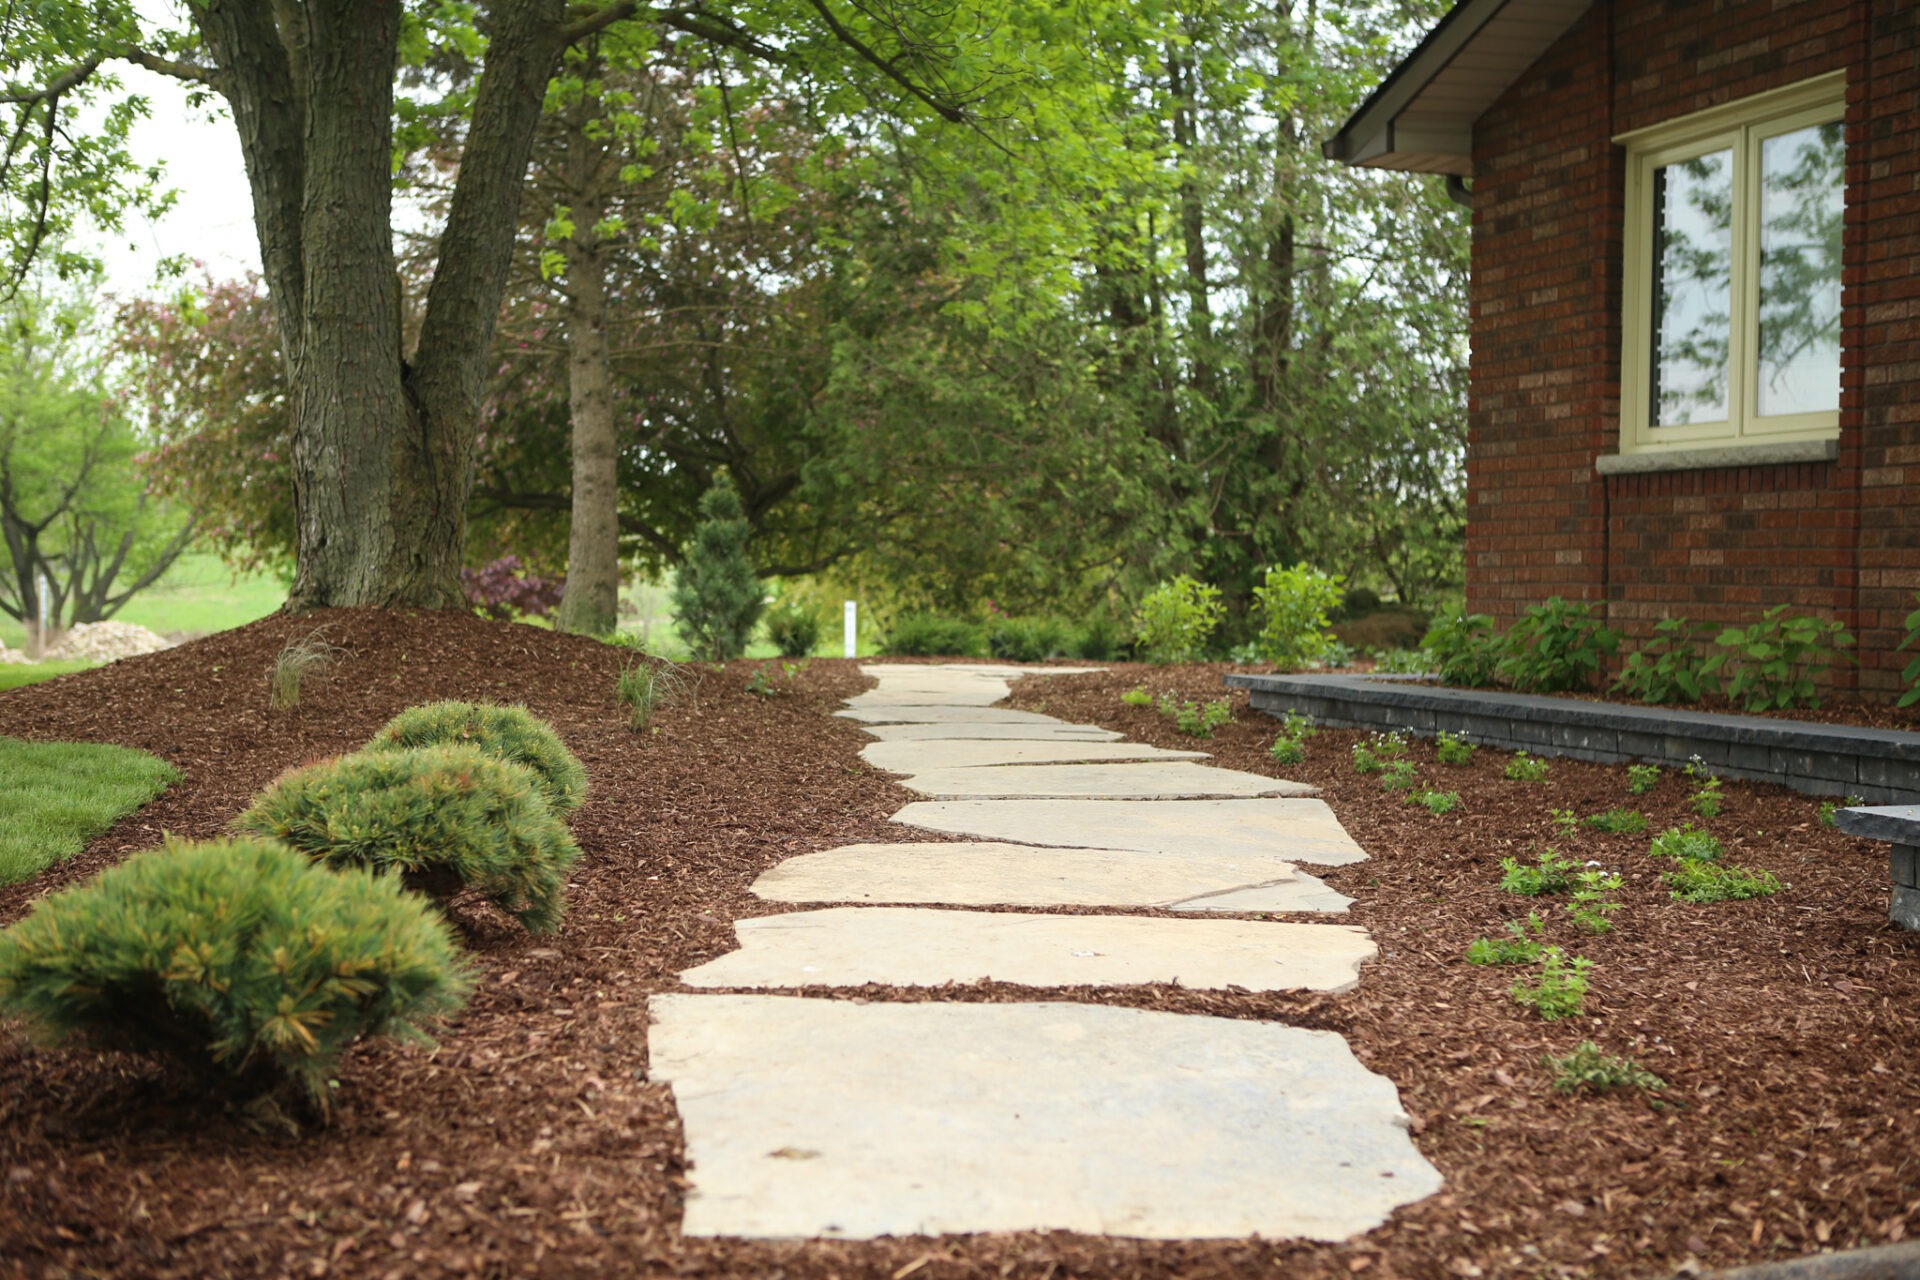 A serene garden pathway with large flat stepping stones surrounded by lush greenery, mulch, and small shrubs near a brick house.